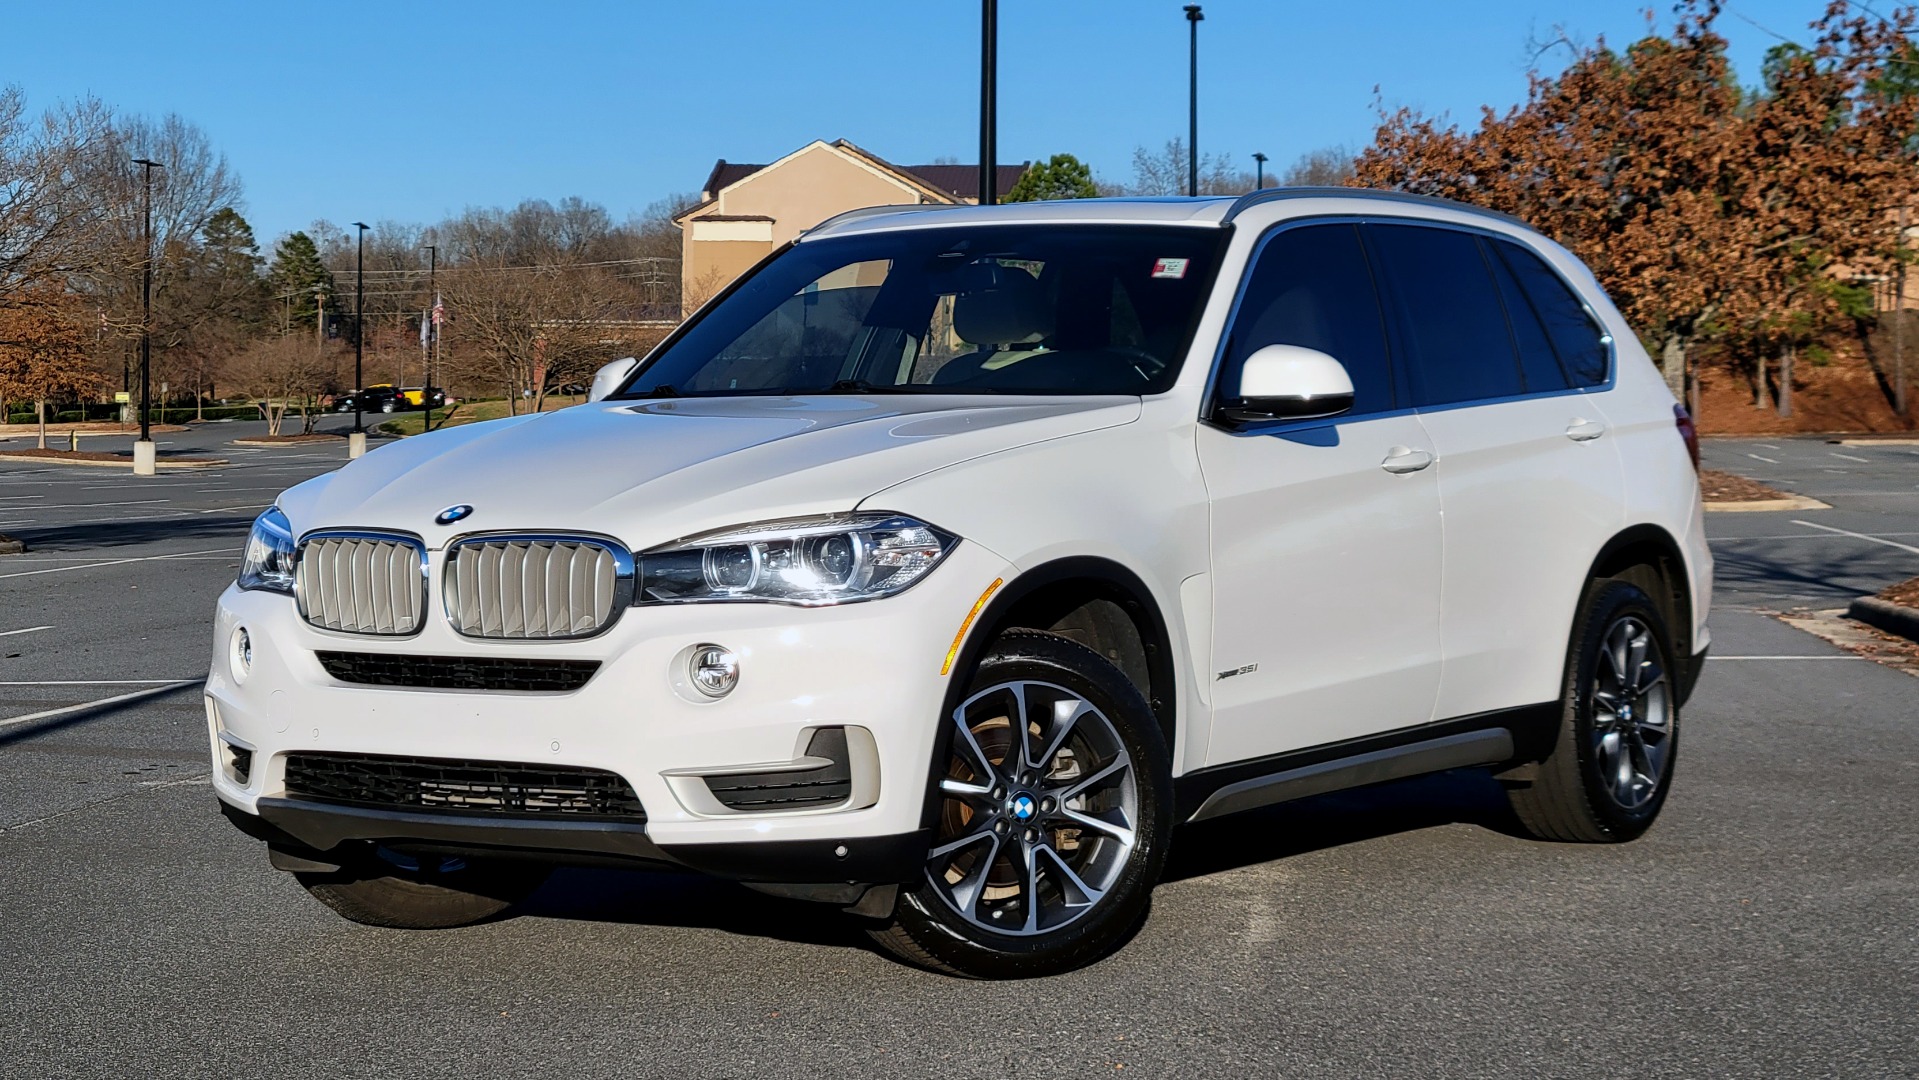 Used 2018 BMW X5 XDRIVE35I PREMIUM / DRVR ASST / HUD / WIRELESS CHARGING / HEATED SEATS for sale Sold at Formula Imports in Charlotte NC 28227 1